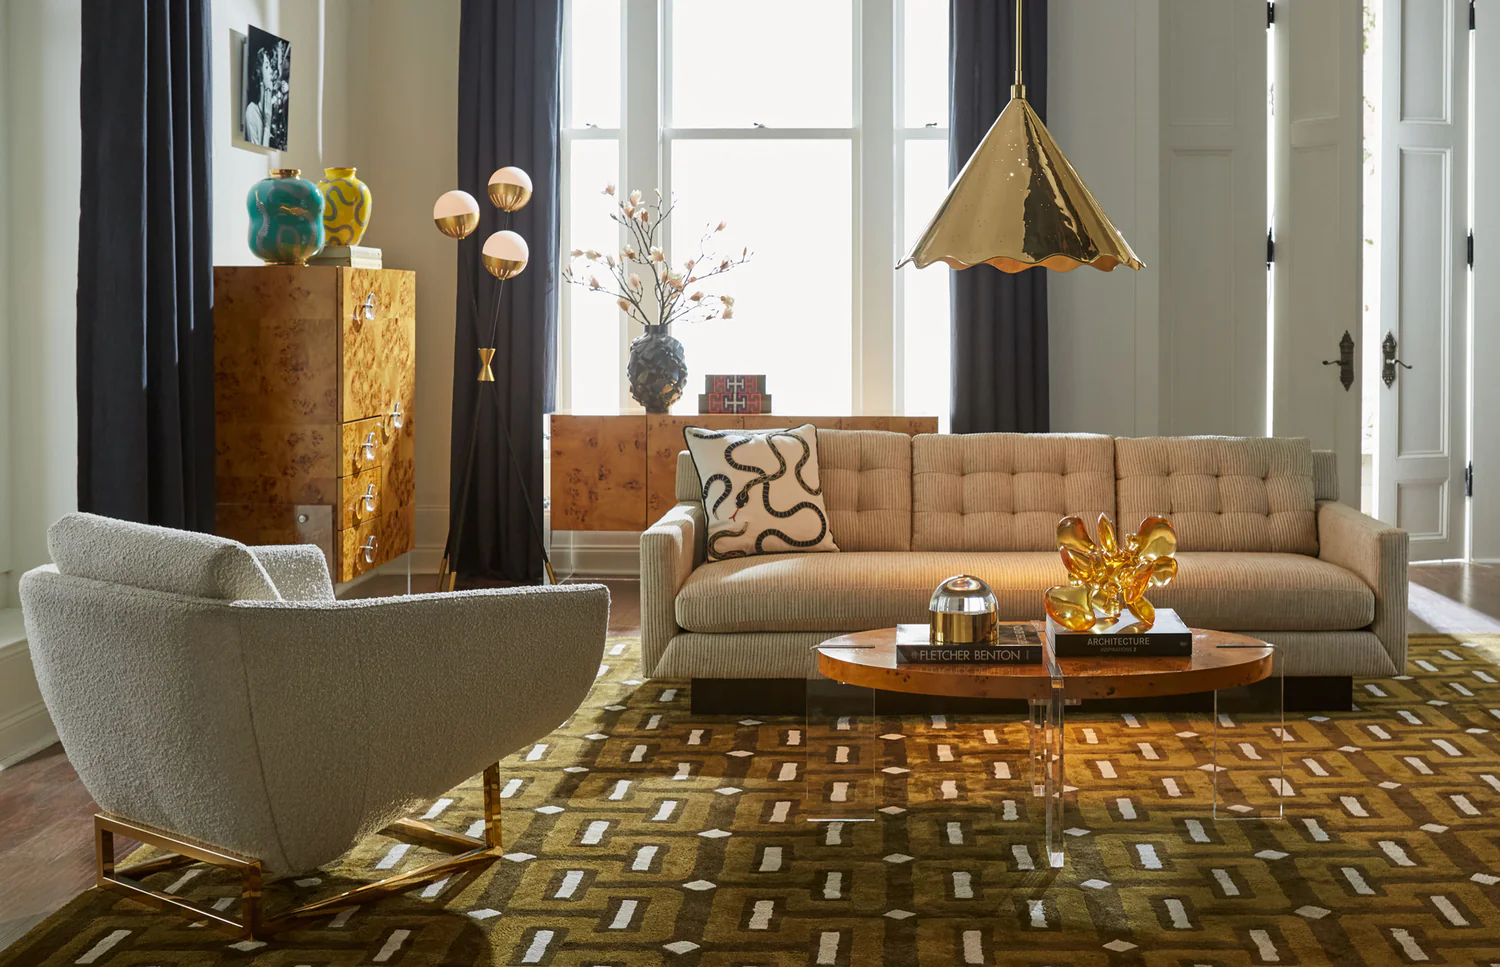 Modern Living Room Furnished by Jonathan Adler Furniture and Accessories including Sofa, Armchair, Rug, and Coffee Table